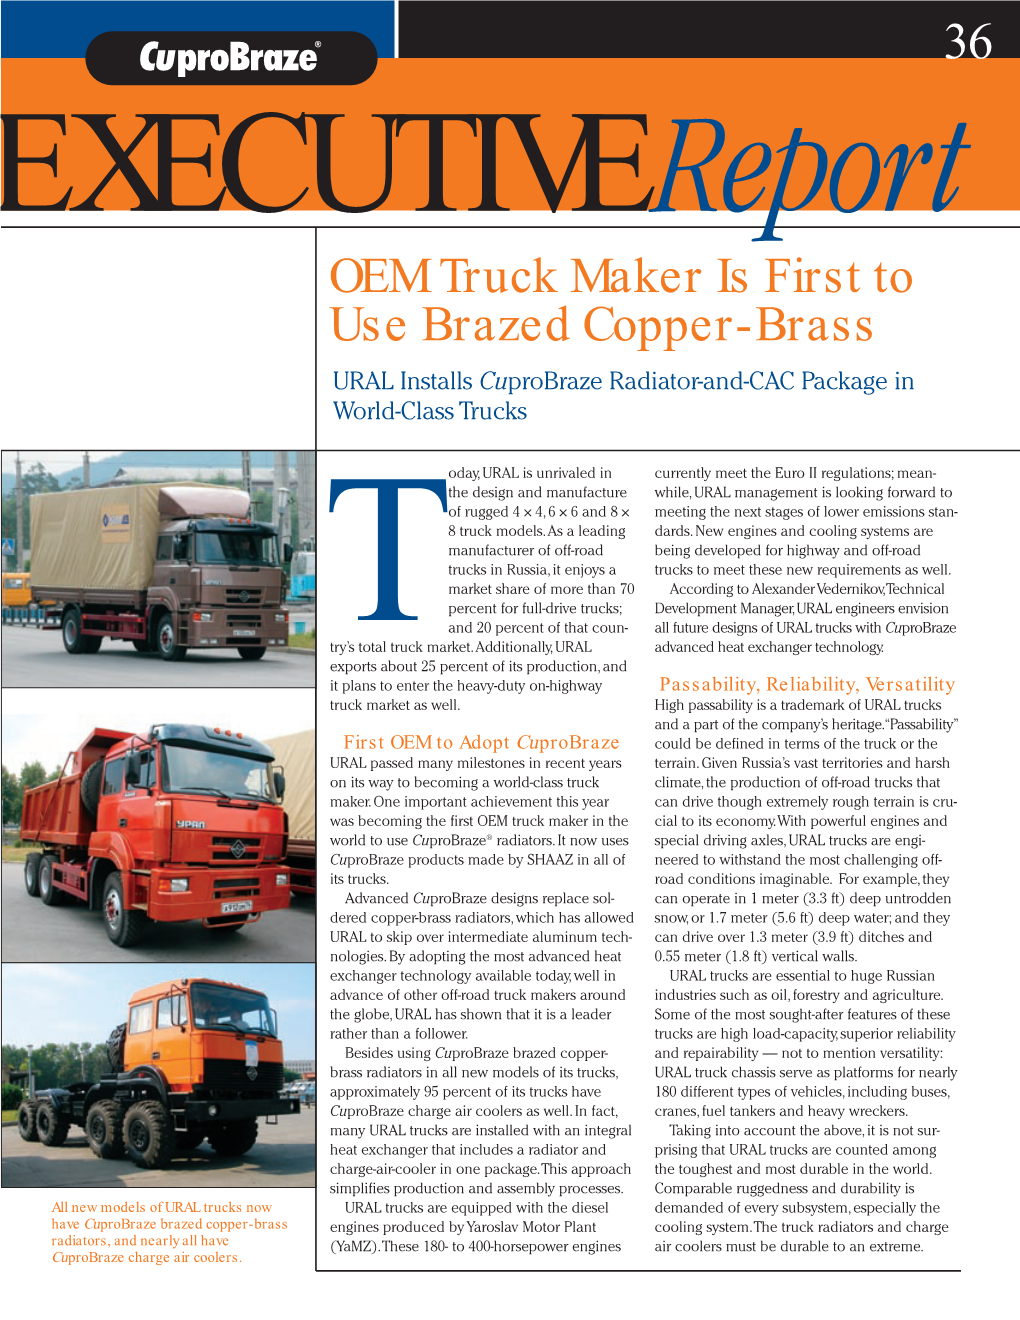 OEM Truck Maker Is First to Use Brazed Copper-Brass URAL Installs Cuprobraze Radiator-And-CAC Package in World-Class Trucks